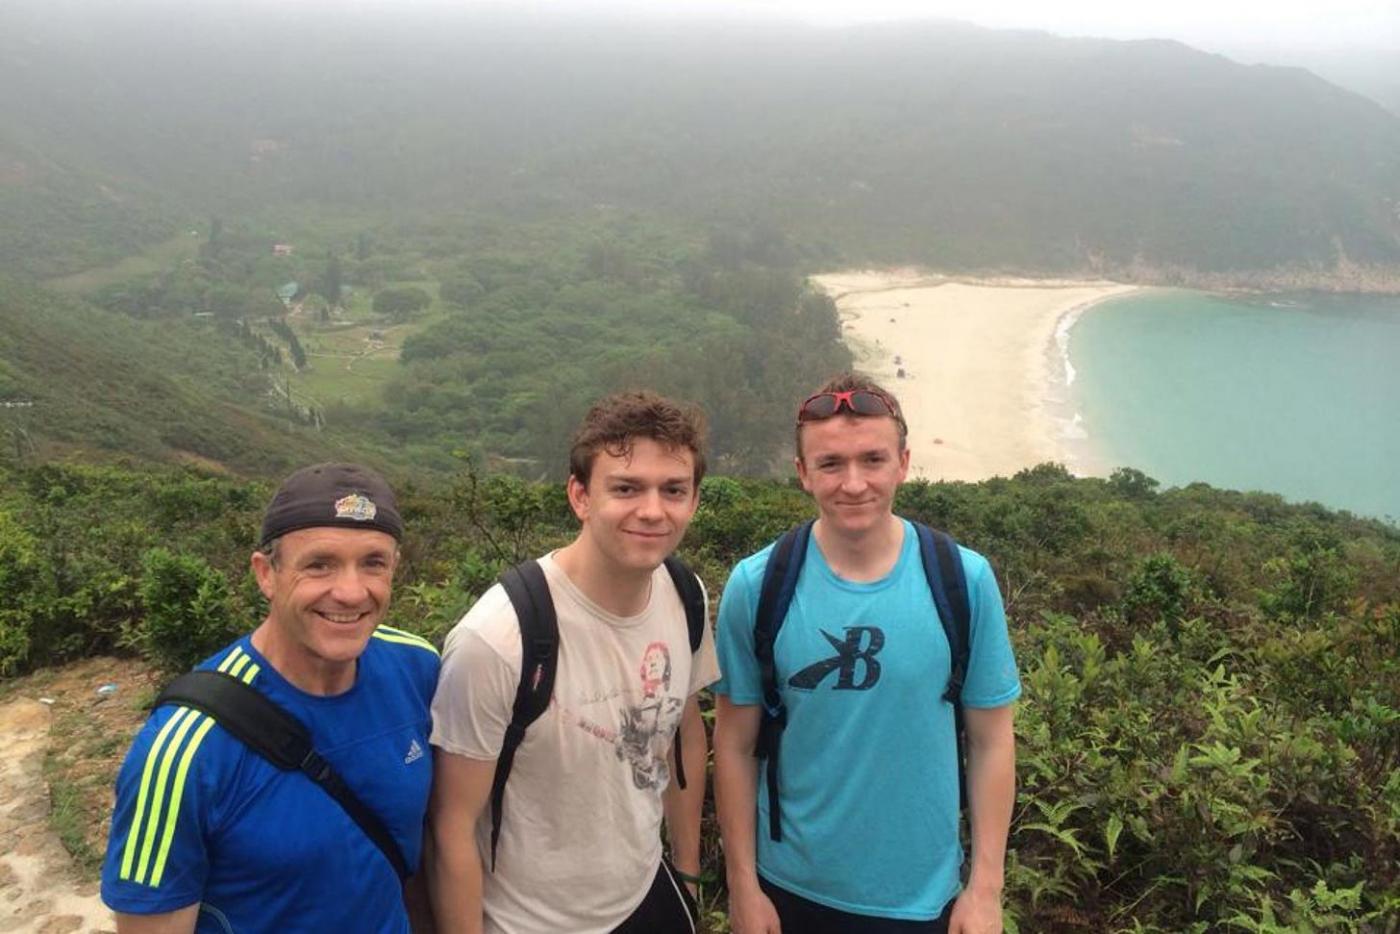 Liam (middle) with, his dad and brother, on a hike with one of Hong Kong&#039;s many beaches in the background. 